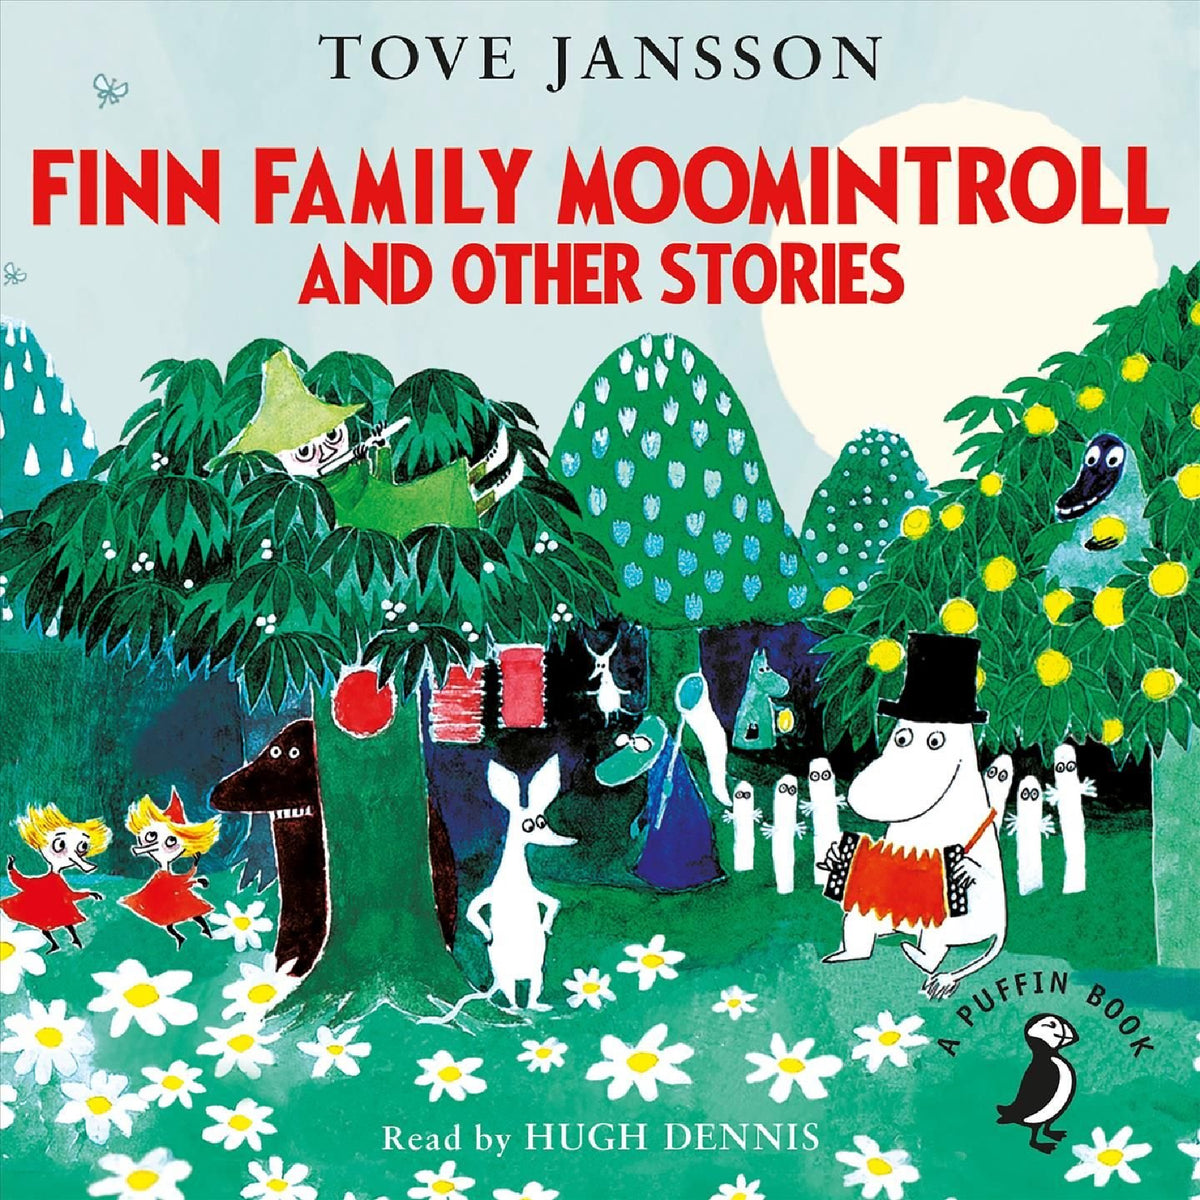 Audio Book Finn Family Moomintroll and Other Stories read by Hugh Dennis